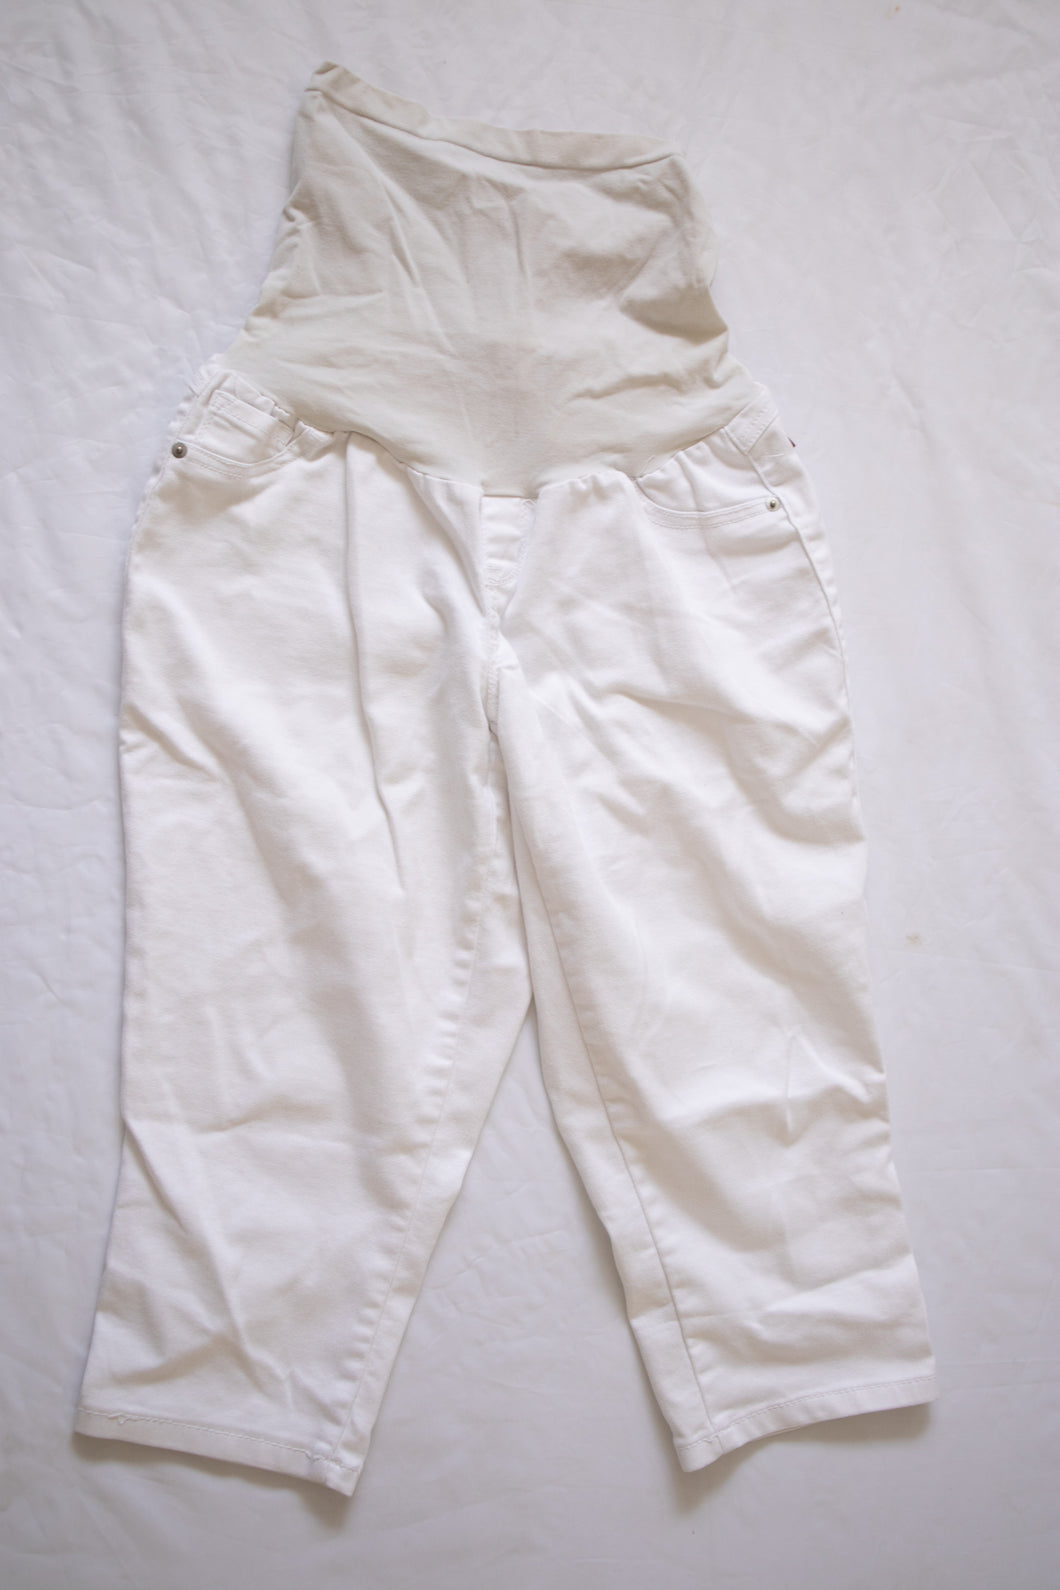 Motherhood Maternity White Denim Capris jeans crops pants summer Affordable Canadian Pregnant Pregnancy clothes sustainable maternity preloved 